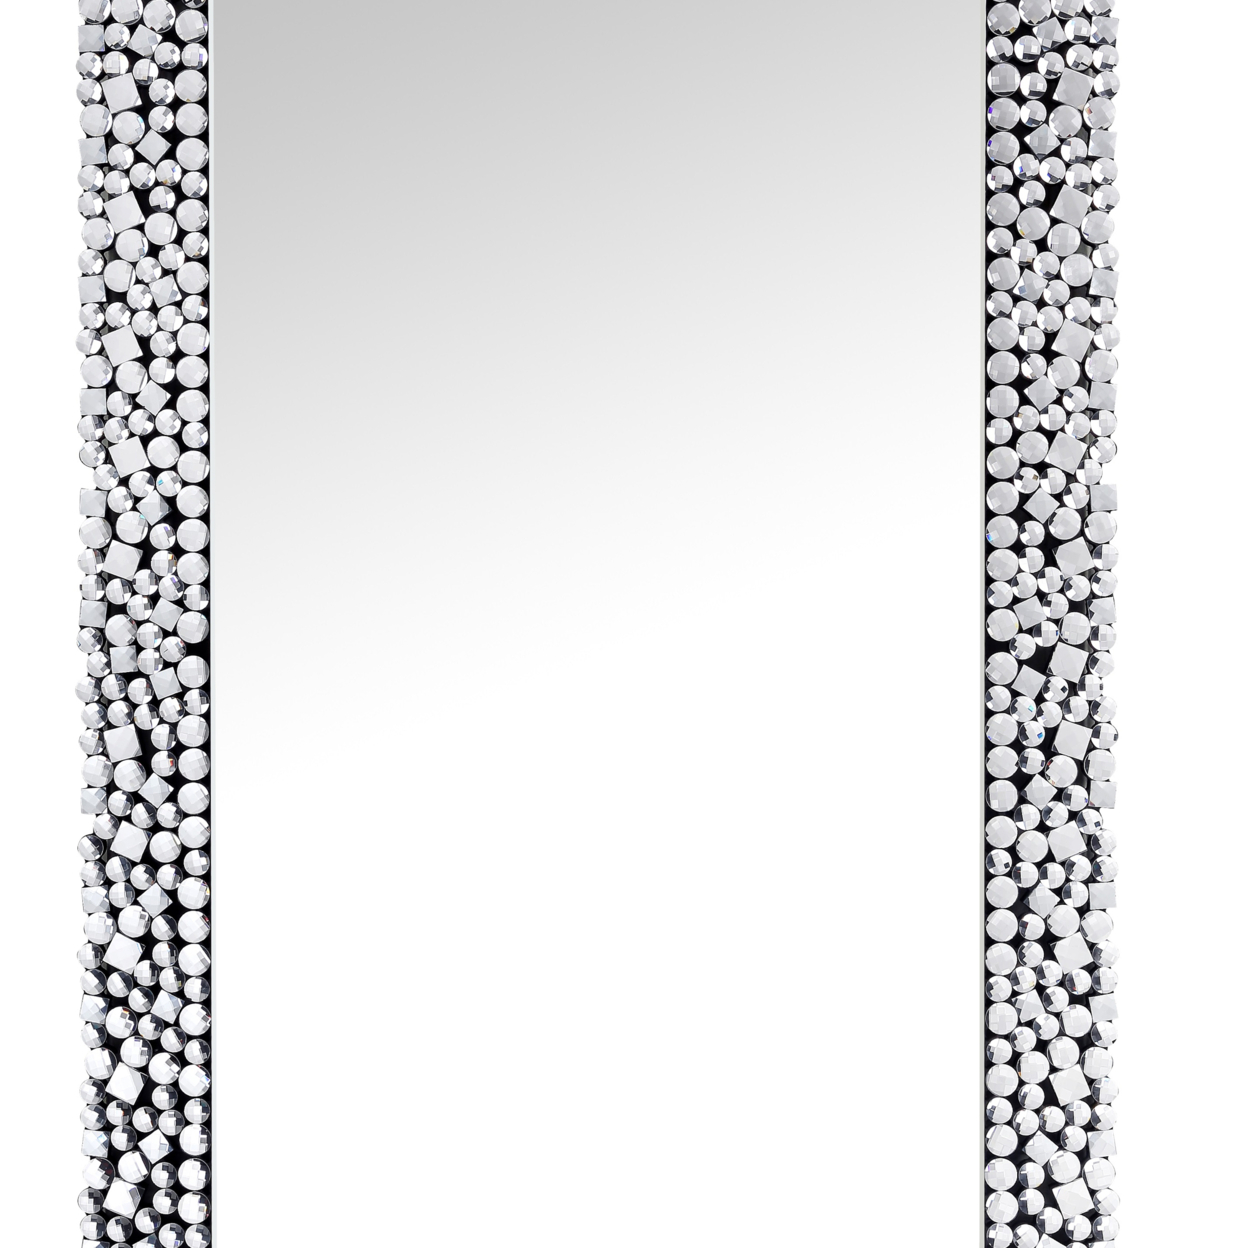 Sparkling Wall Decor With Beveled Edges And Faux Gem Inlay, Silver- Saltoro Sherpi